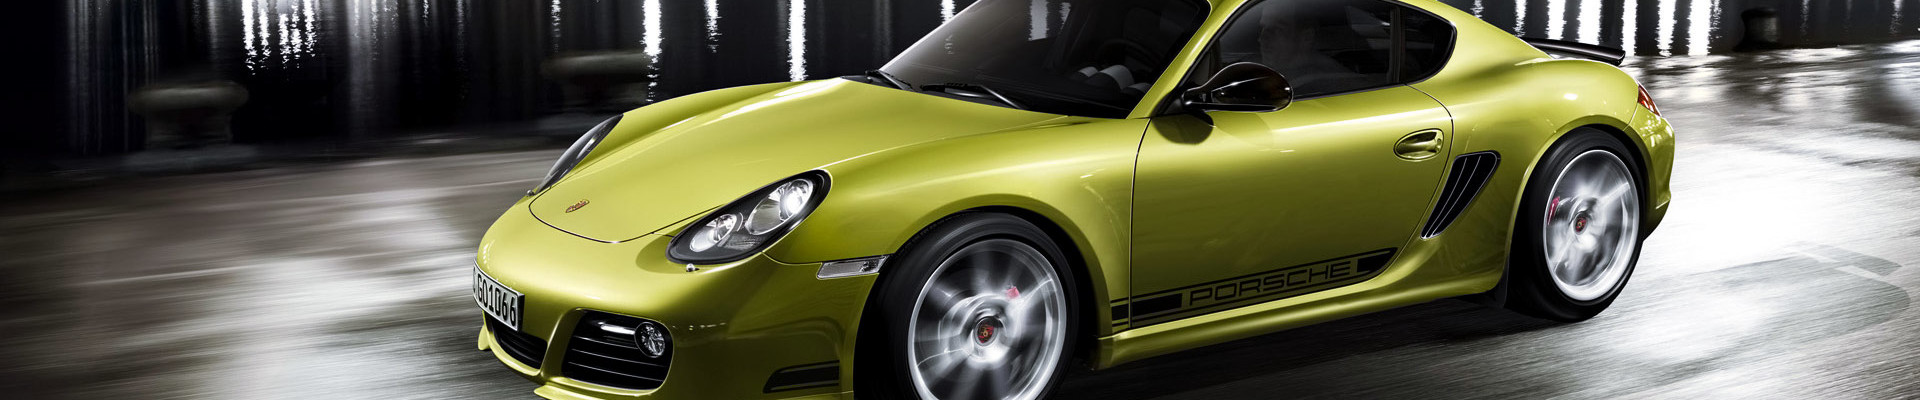 Used Porsche Cayman Buying Guide